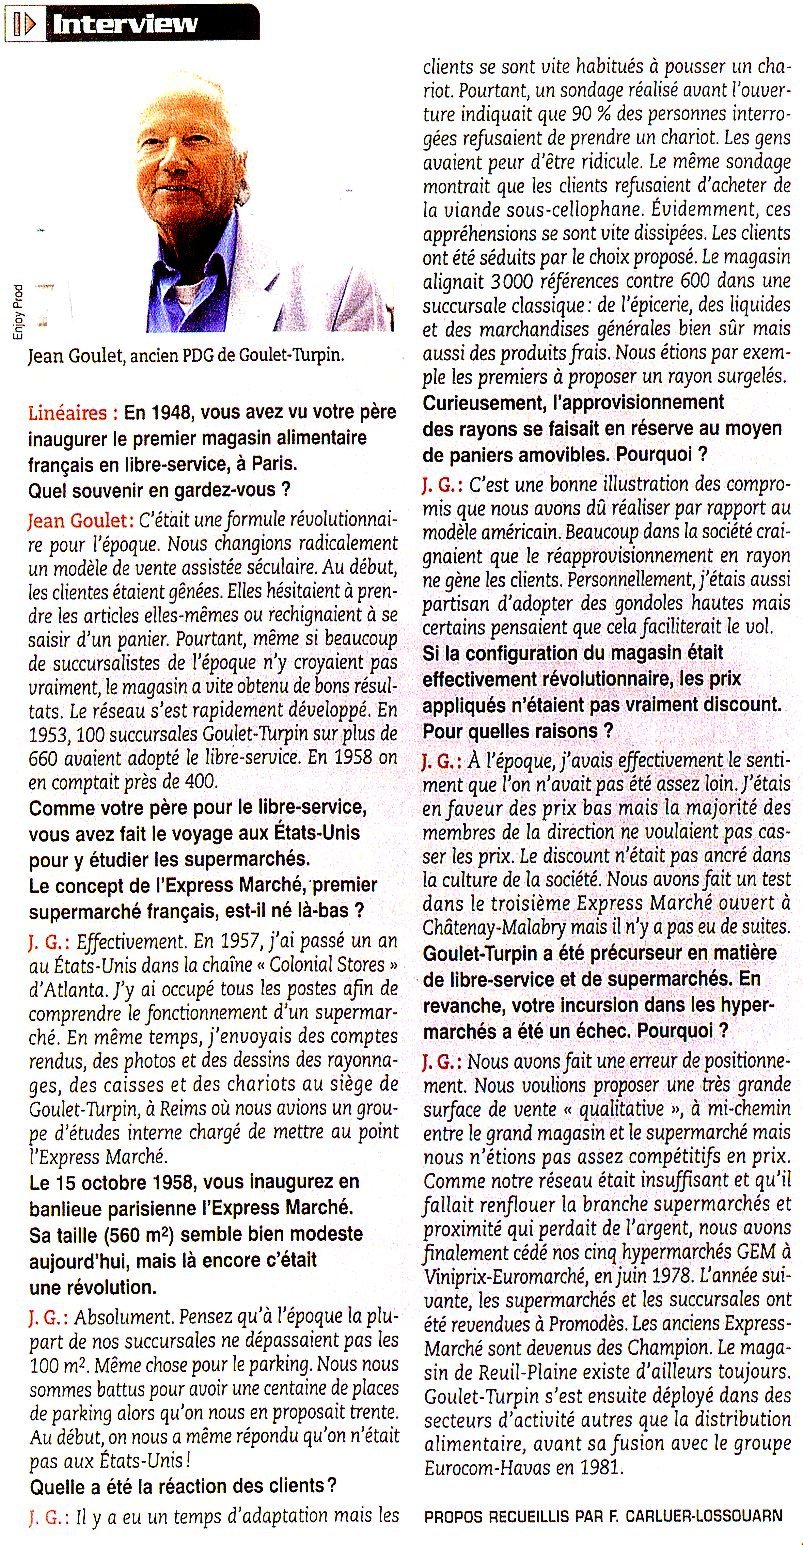 INTERVIEW JEAN GOULET LINEAIRES